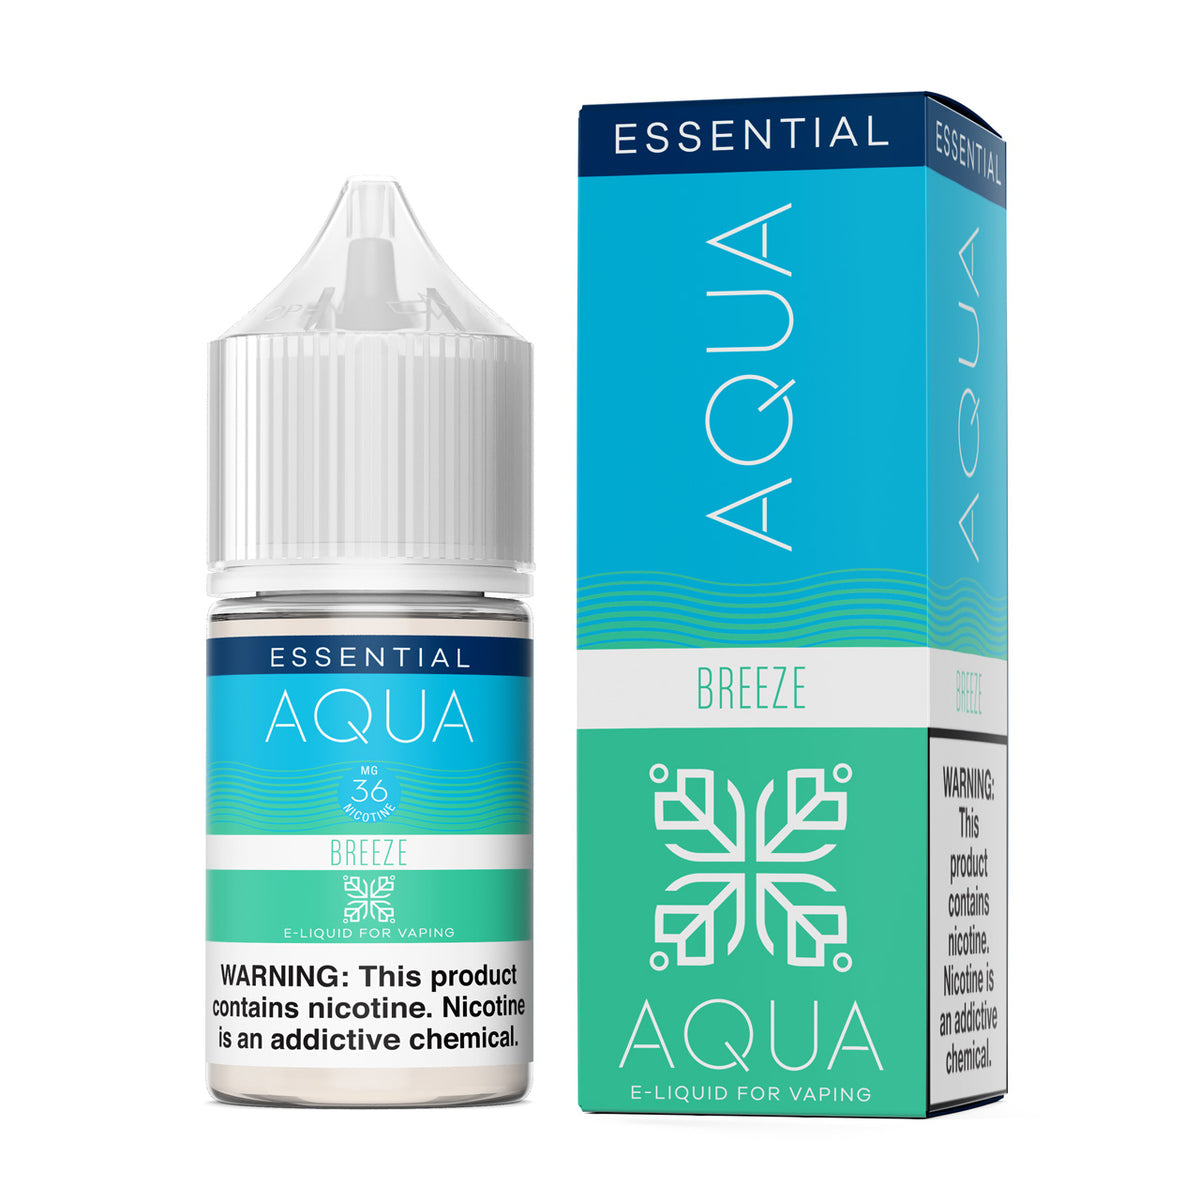 Breeze by Aqua Salts Series 30mL with Packaging